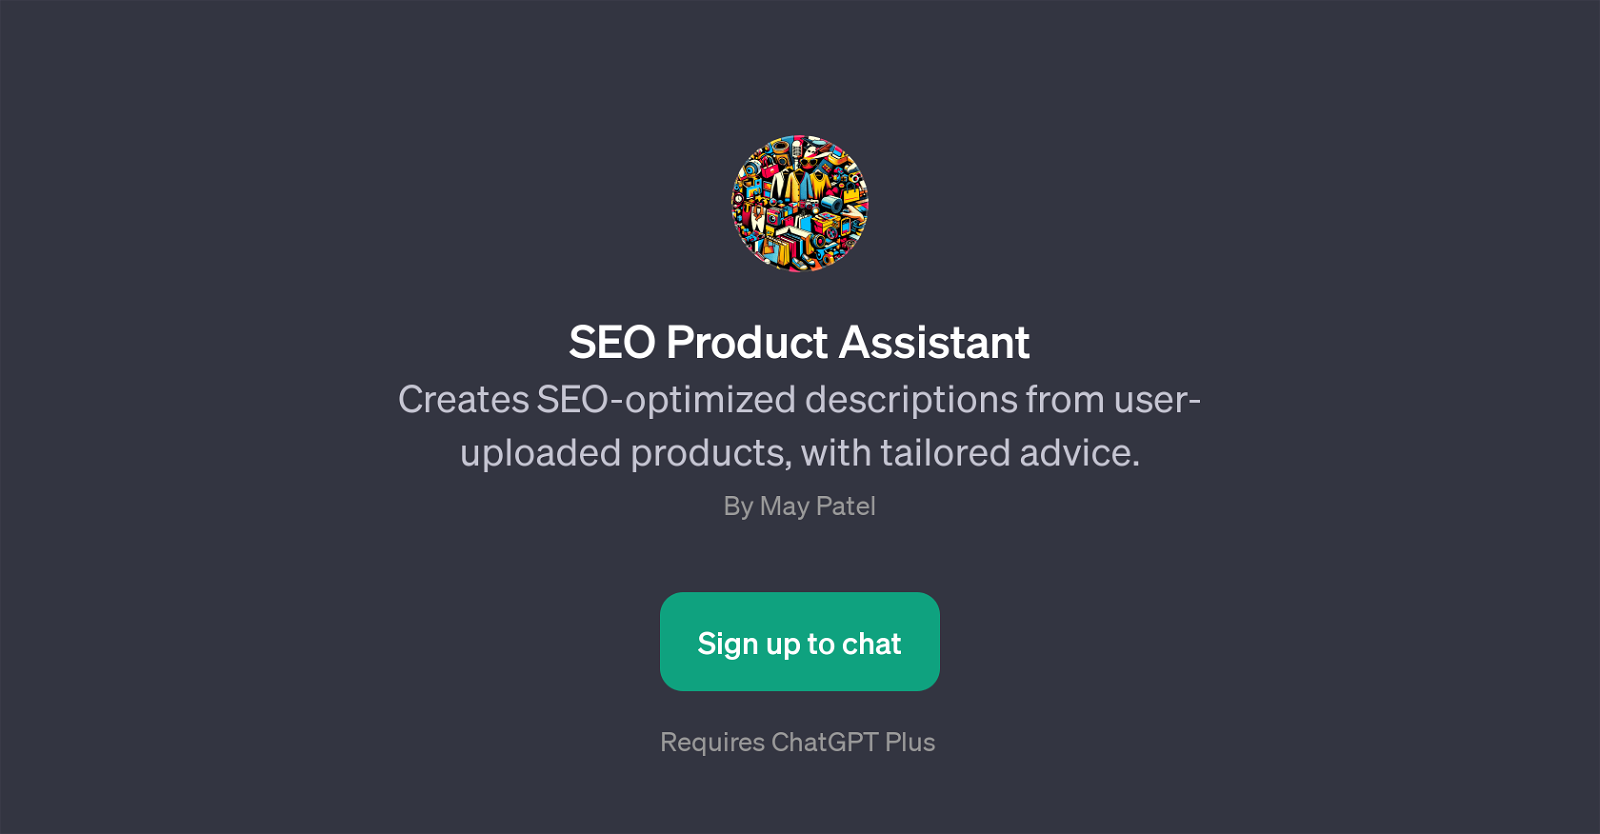 SEO Product Assistant website